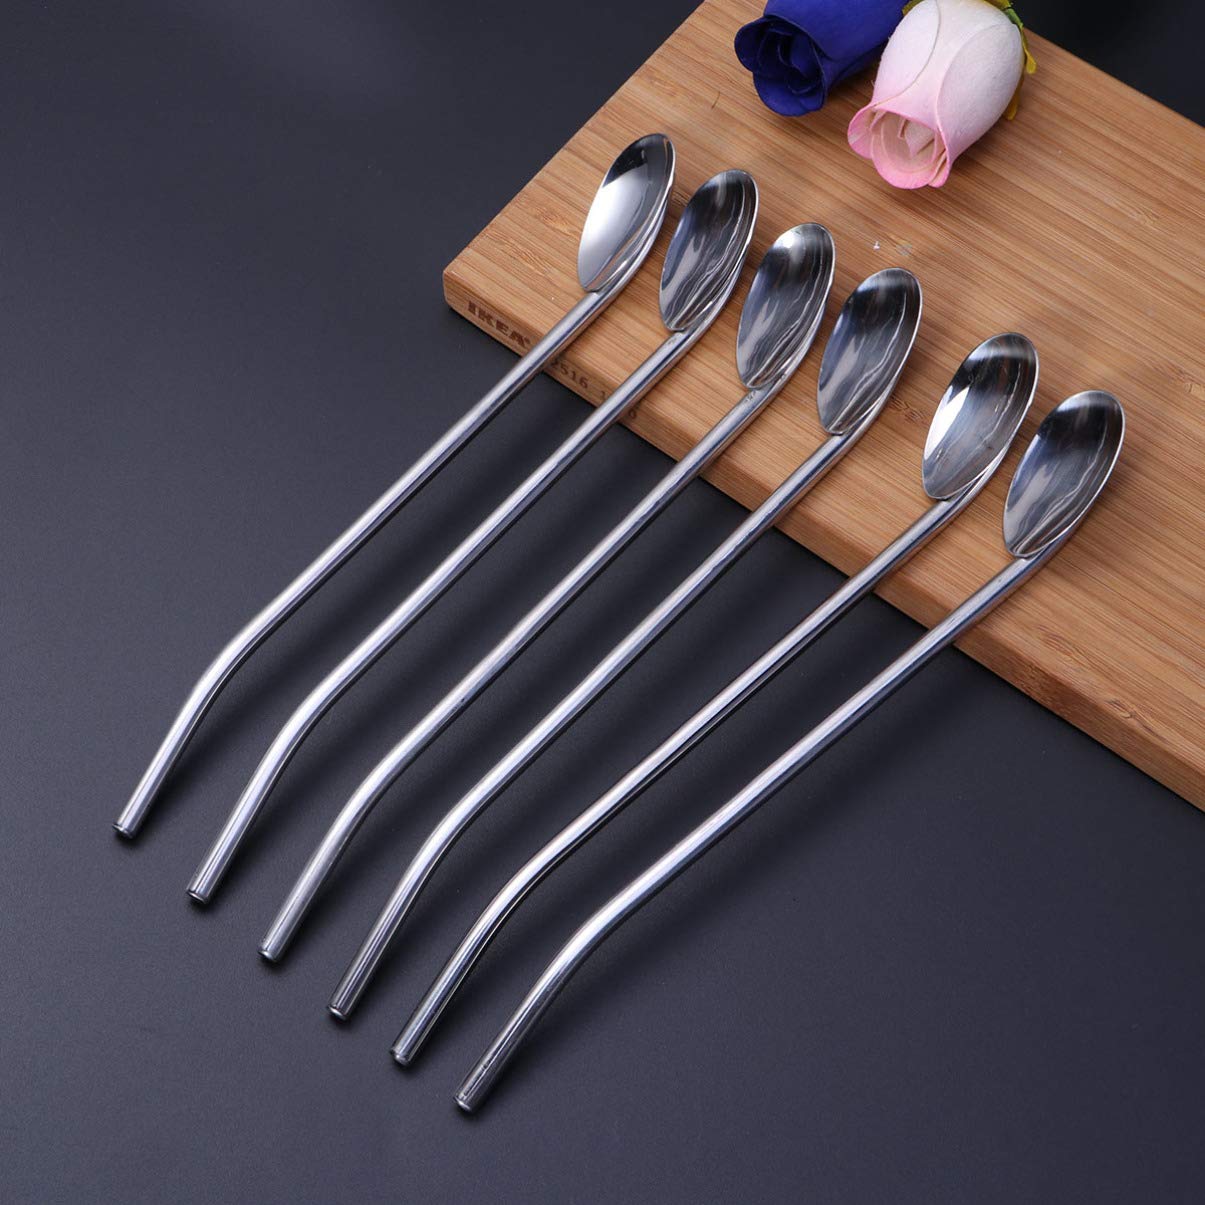 DOITOOL Stainless Steel Drinking Spoon Straws, 6Pcs Metal Cocktail Spoon Straws, Reusable Iced Tea Spoons Bar Spoon Silverware for Mixing and Stirring